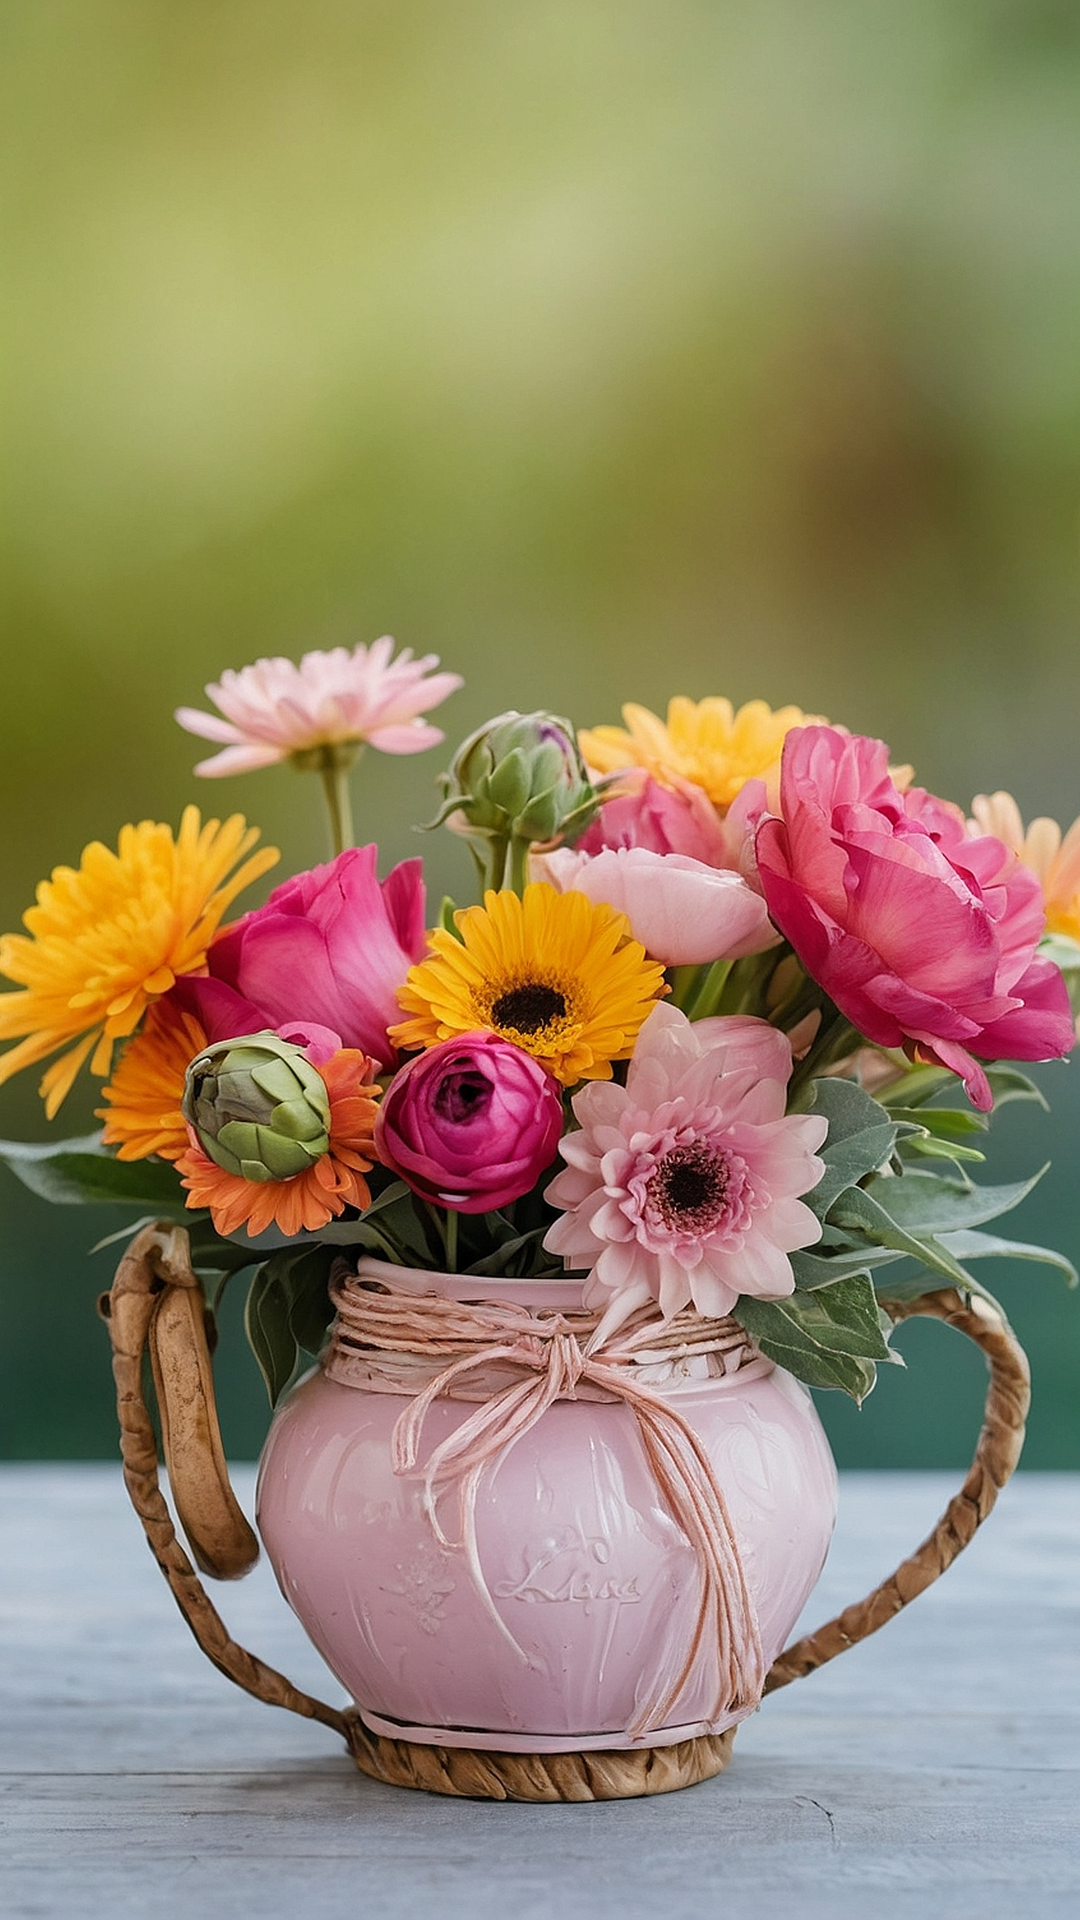 Beautiful Flower Arrangements for Mother's Day